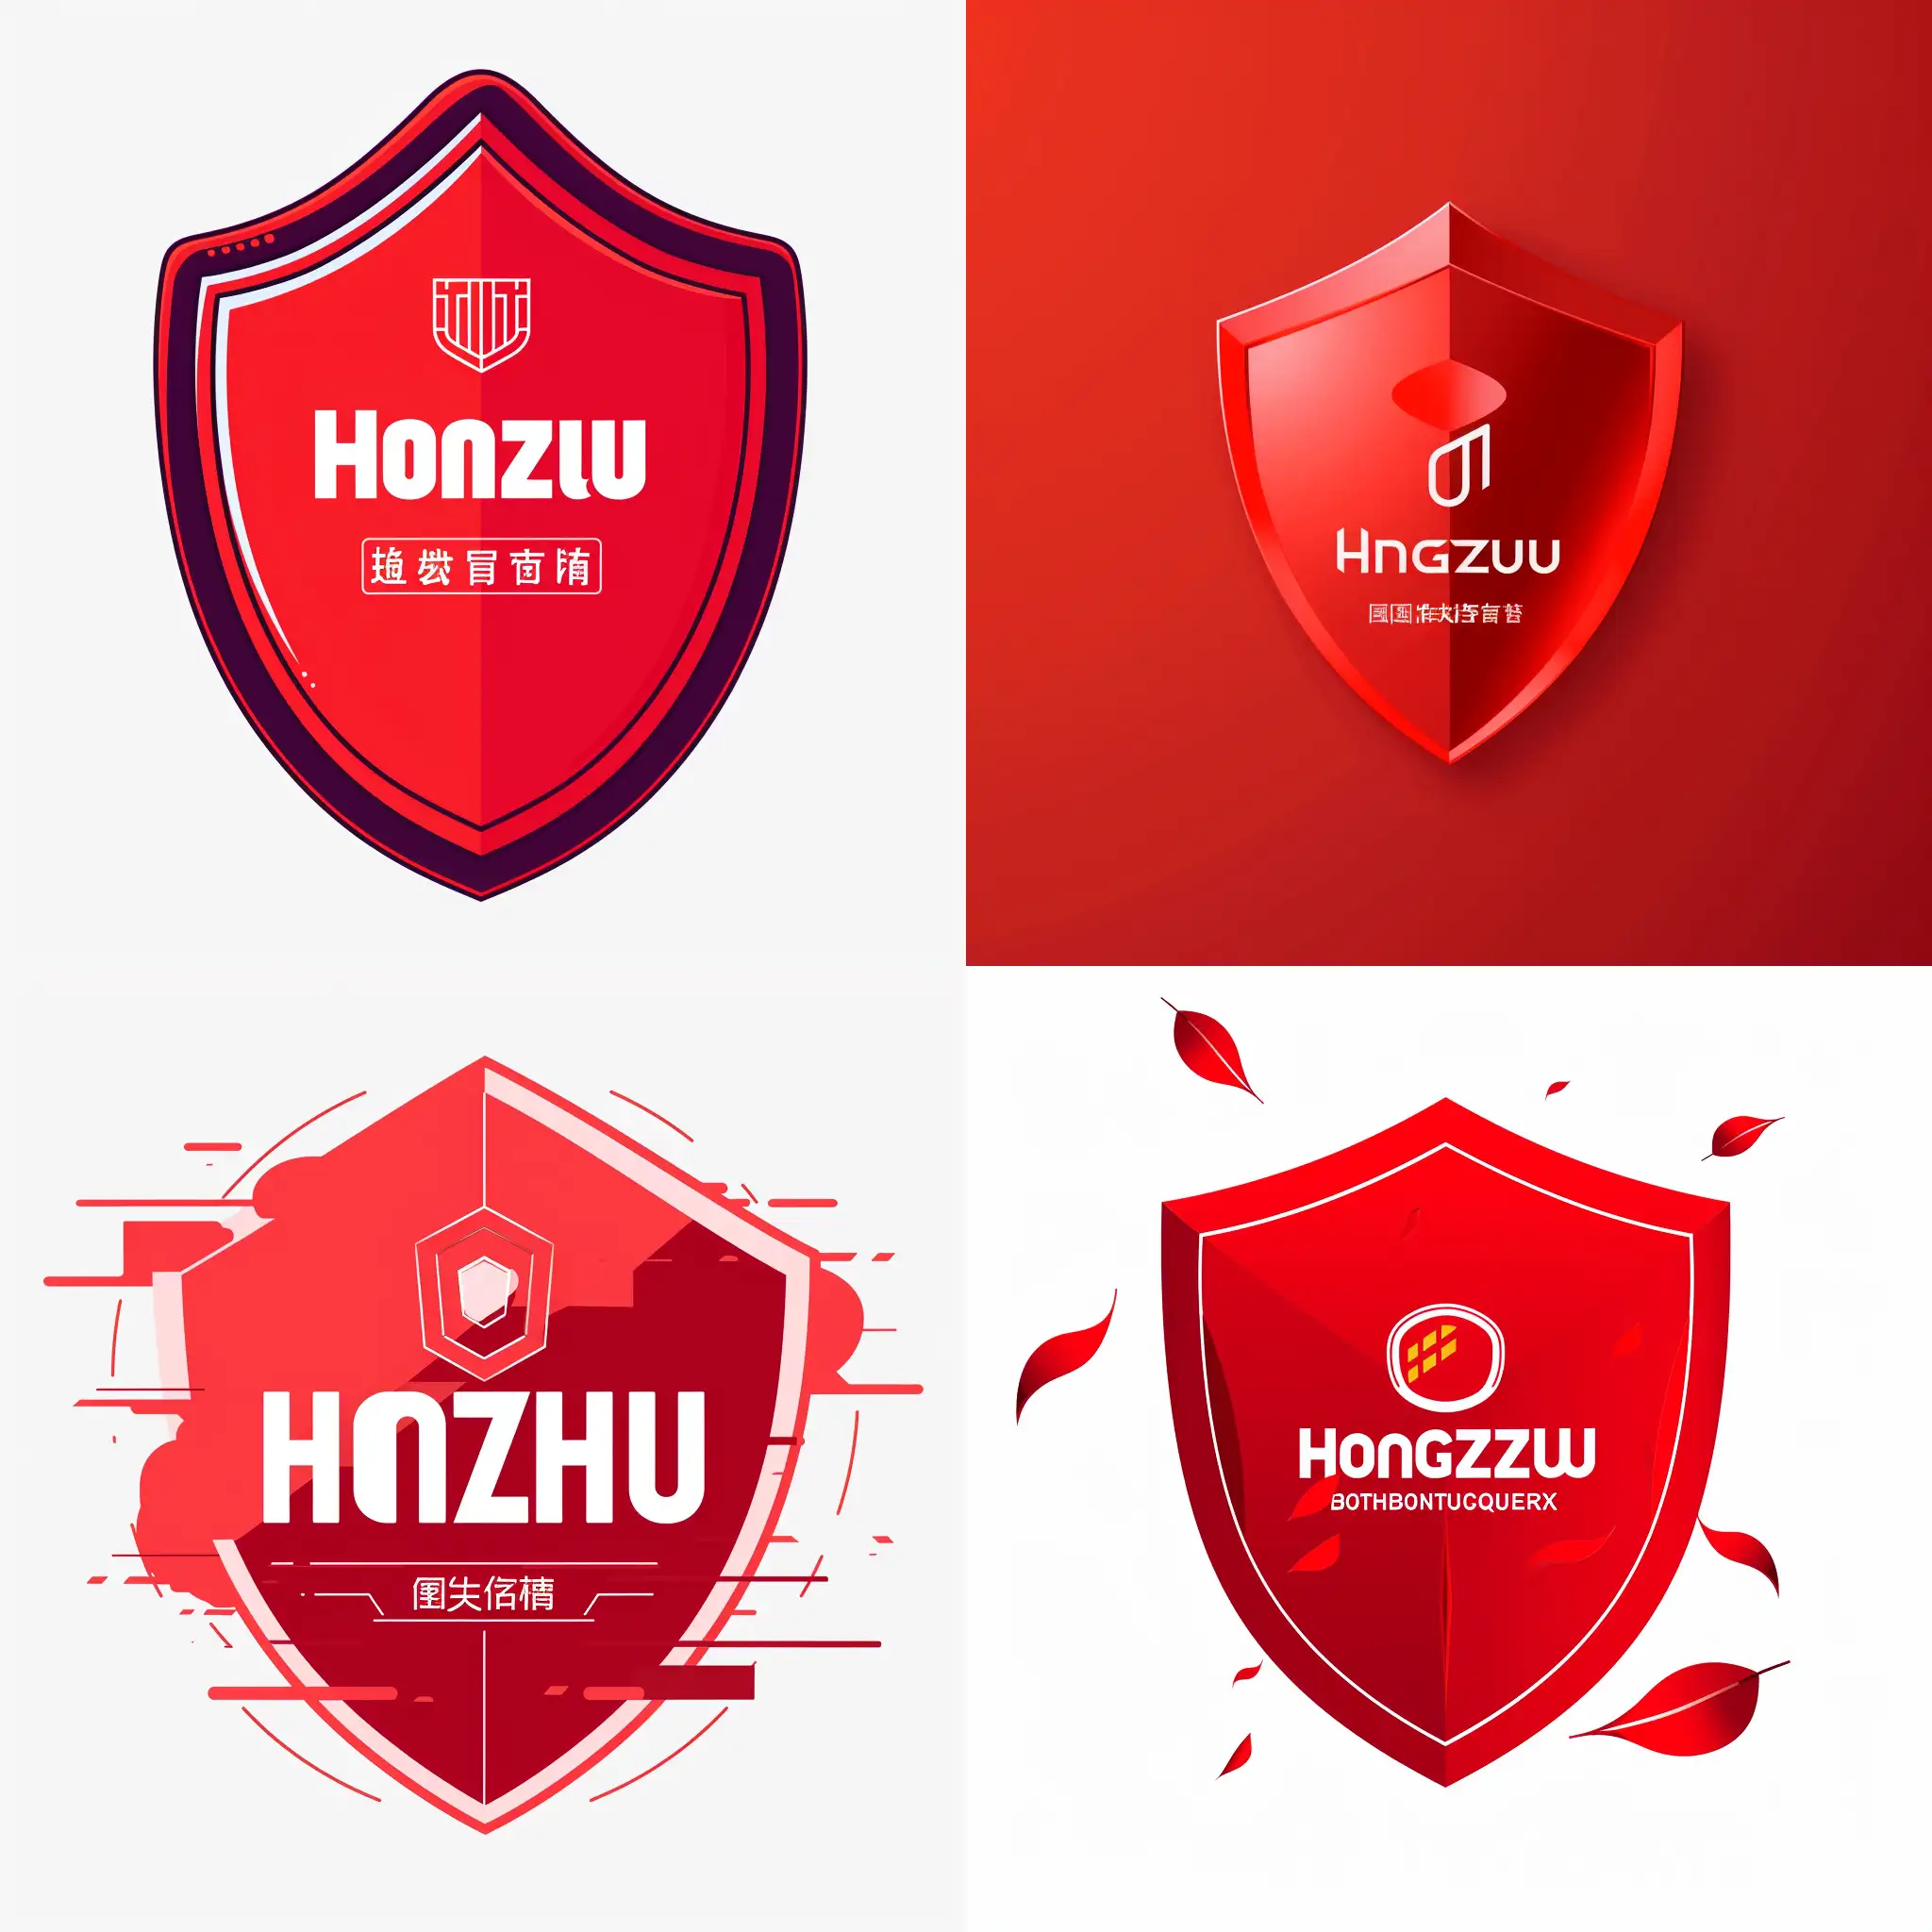 **Description**: Create a minimalist digital illustration that represents the concept of business-finance integration, featuring the iconic imagery of "Hongzhu" brand. The illustration should convey professionalism and simplicity.
**Examples**: McKinsey, Deloitte, Accenture, Bain, IBM, Boston Consulting Group.
**Constraints**: Use red color and keep the design minimalist.
**Preferences**: Incorporate a shield motif.
**Output Format**: PNG.
